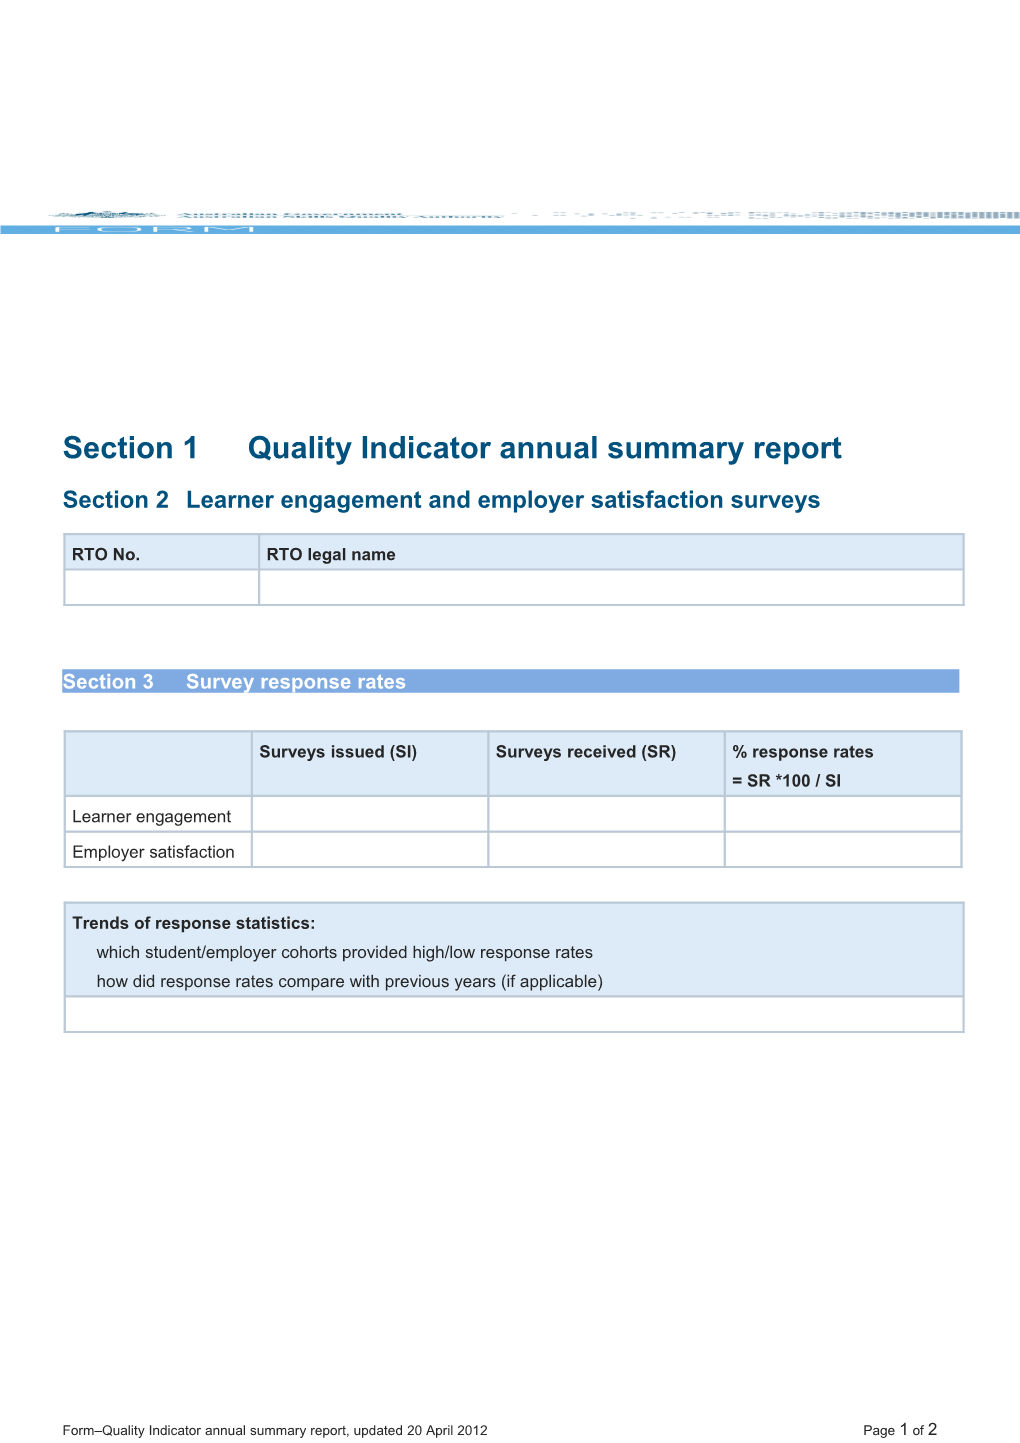 Quality Indicator Annual Summary Report